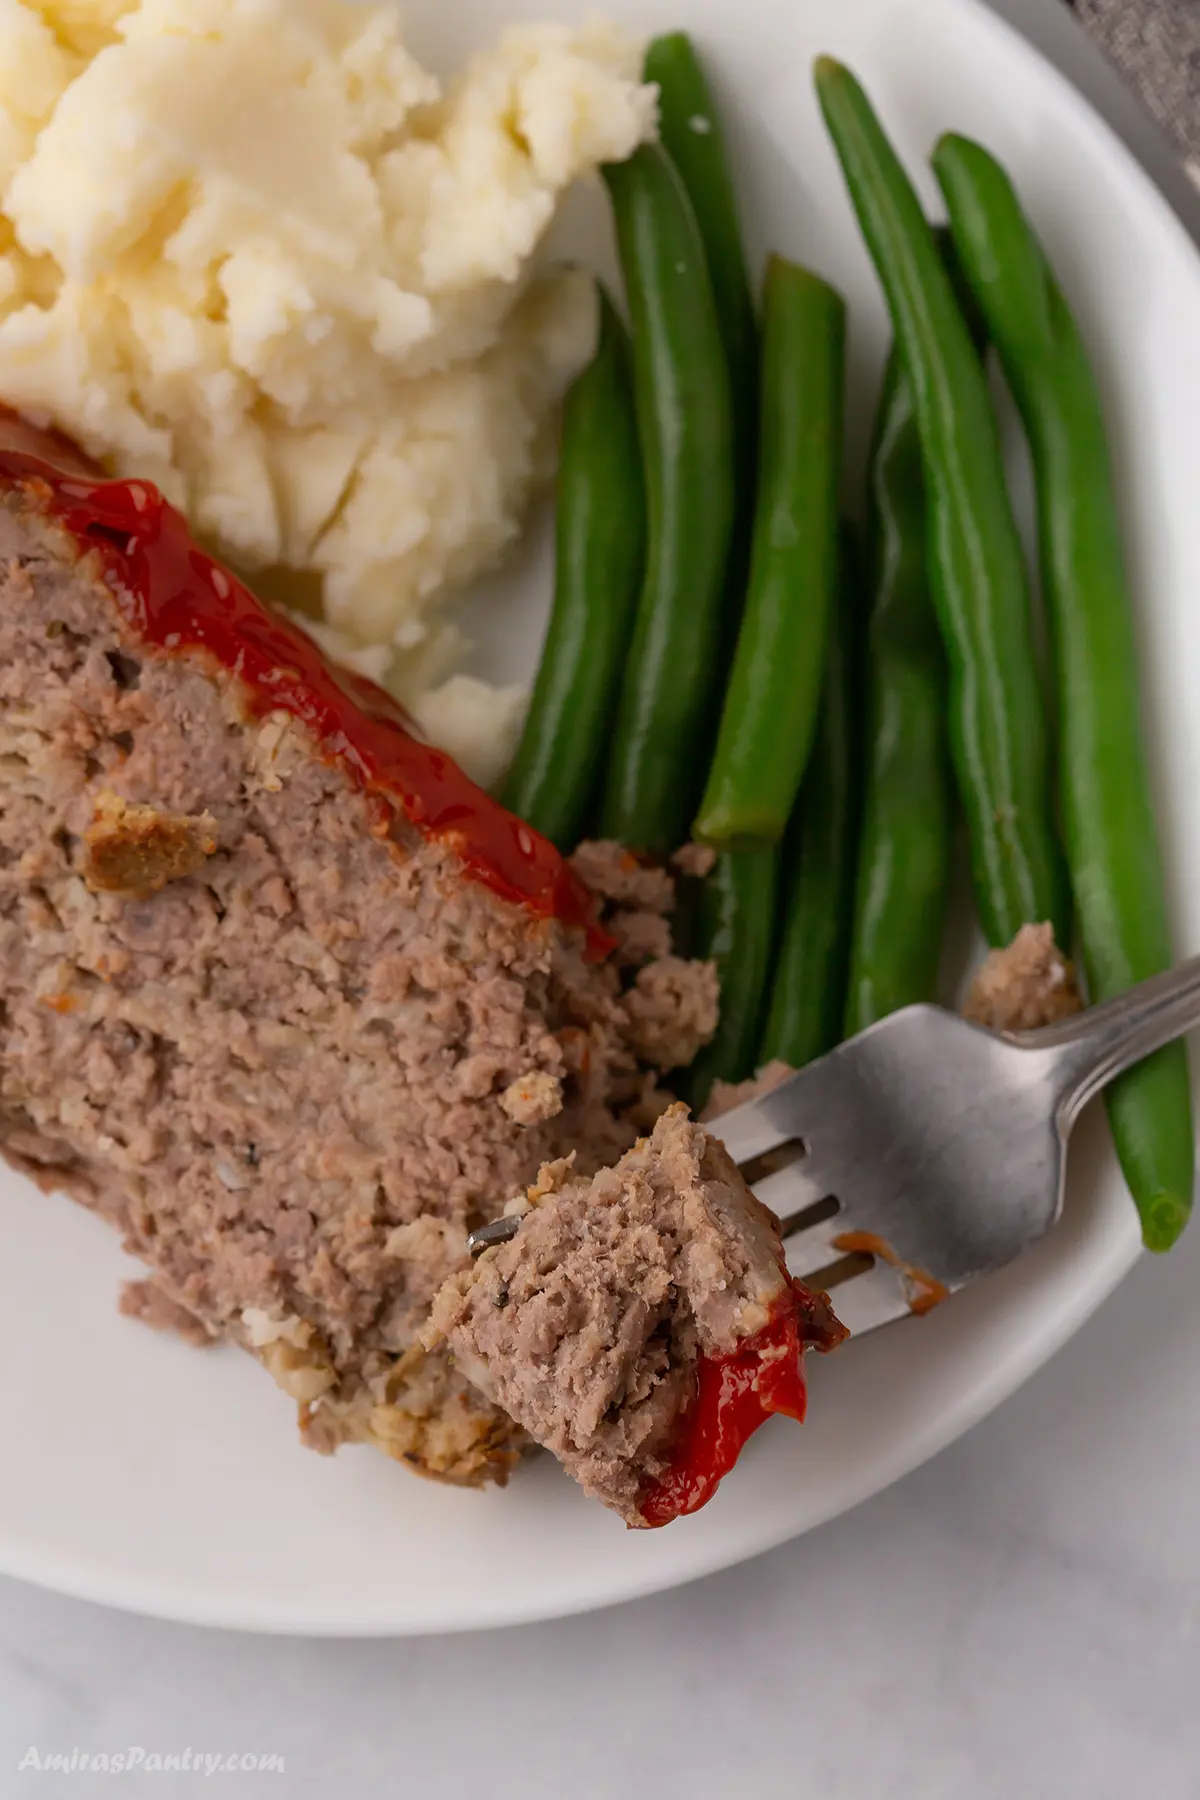 A plate wirh a slice of meatloaf with mashed potatoes.